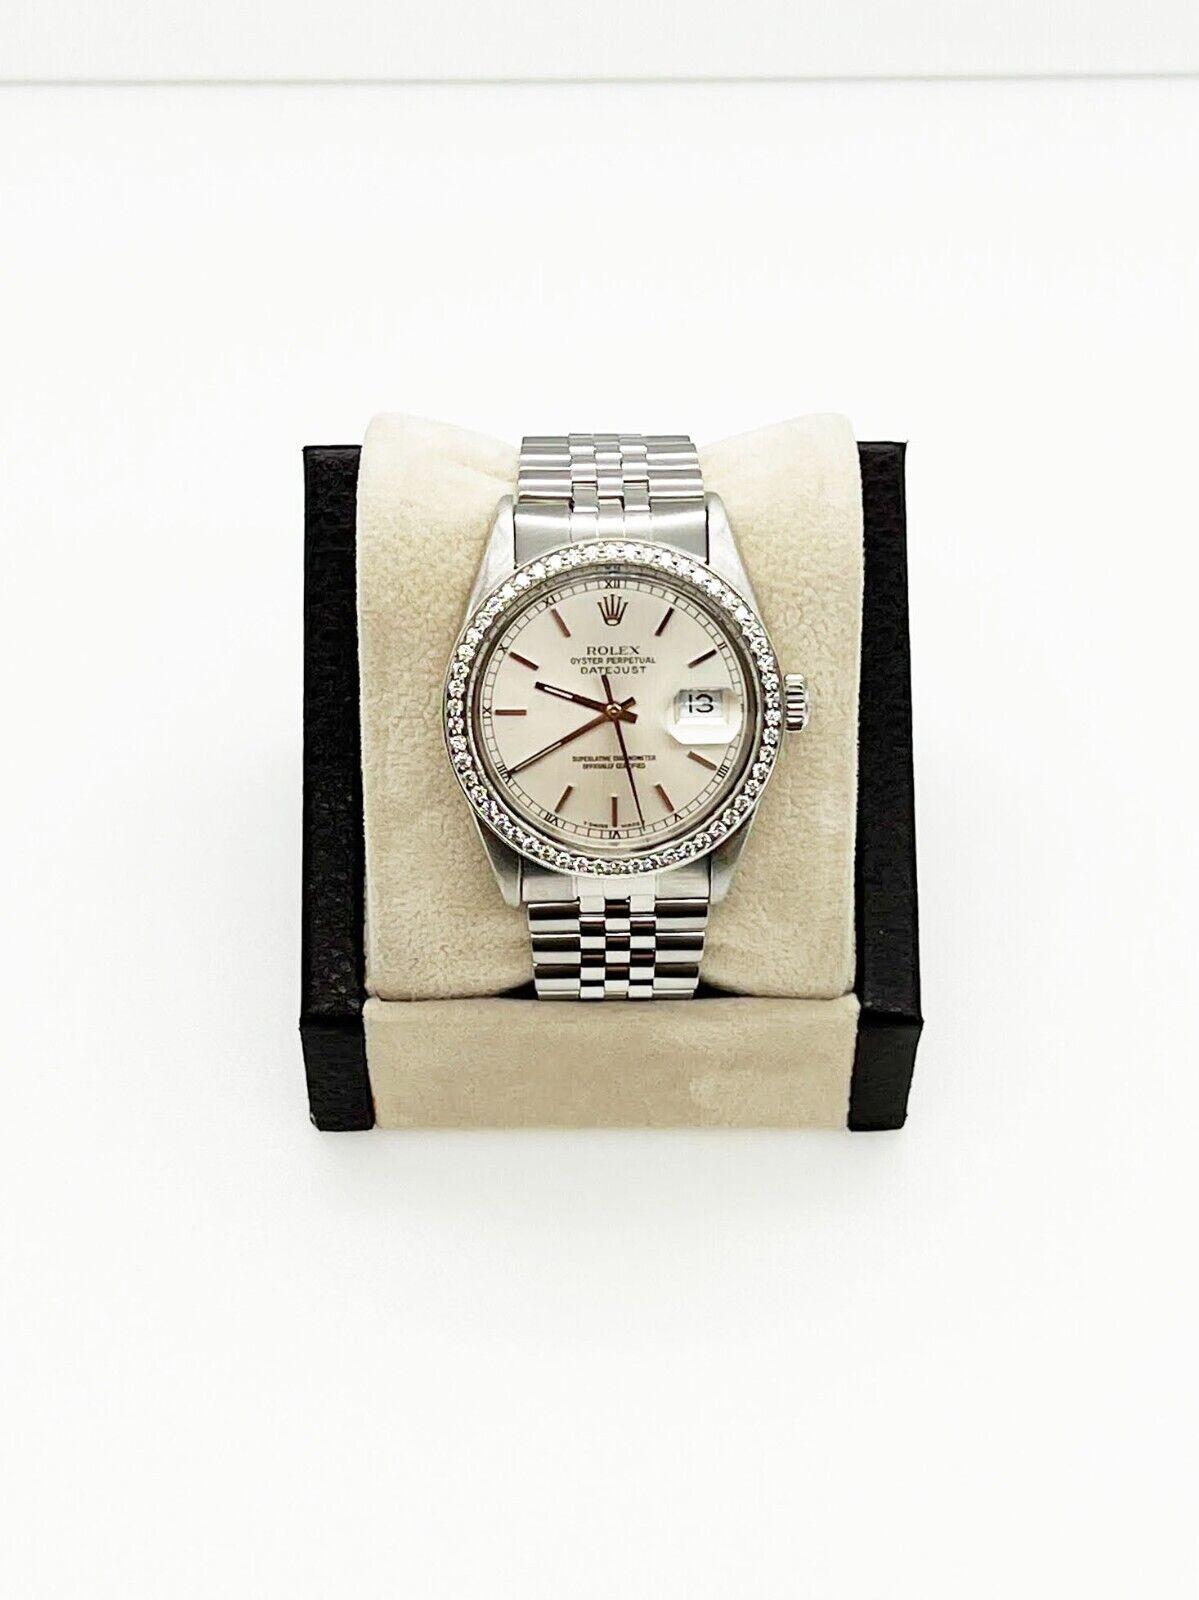 Style Number: 16014

 
Serial: 5591***

Year: 1978

Model: Datejust 

Case Material: Stainless Steel 

Band: Stainless Steel 

Bezel: Custom Diamond Bezel 

Dial: Silver

Face: Sapphire Crystal 

Case Size: 36mm 

Includes: 

-Elegant Watch